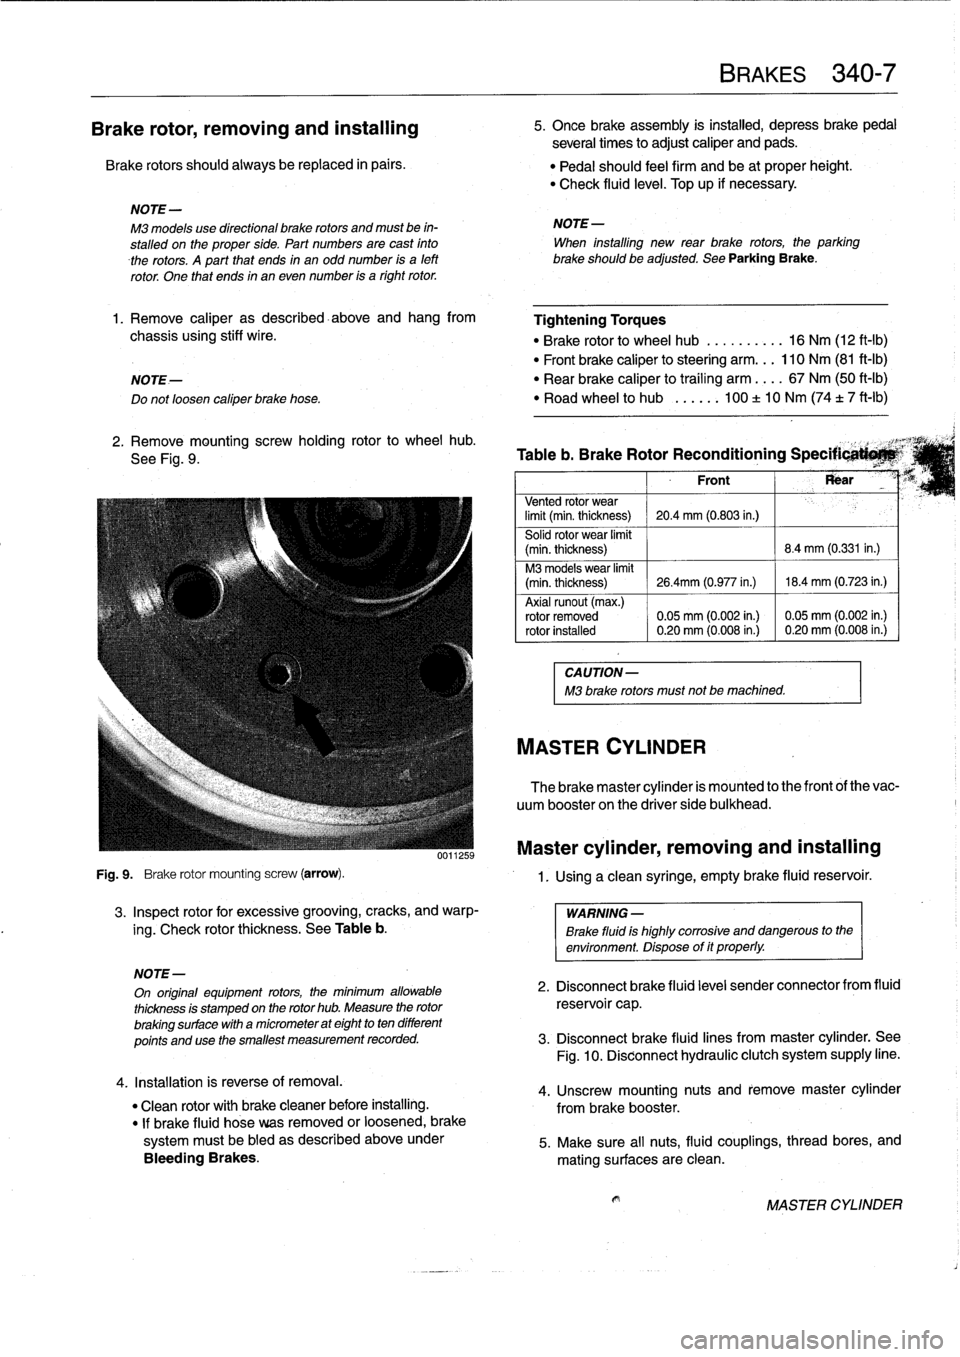 BMW 323i 1993 E36 Owners Guide 
Brake
rotor,
removing
and
installing

Brake
rotors
shouldalways
be
replaced
in
pairs
.

Fig
.
9
.

	

Brake
rotor
mounting
screw
(arrow)
.

3
.
Inspect
rotor
for
excessive
grooving,
cracks,
and
warp-